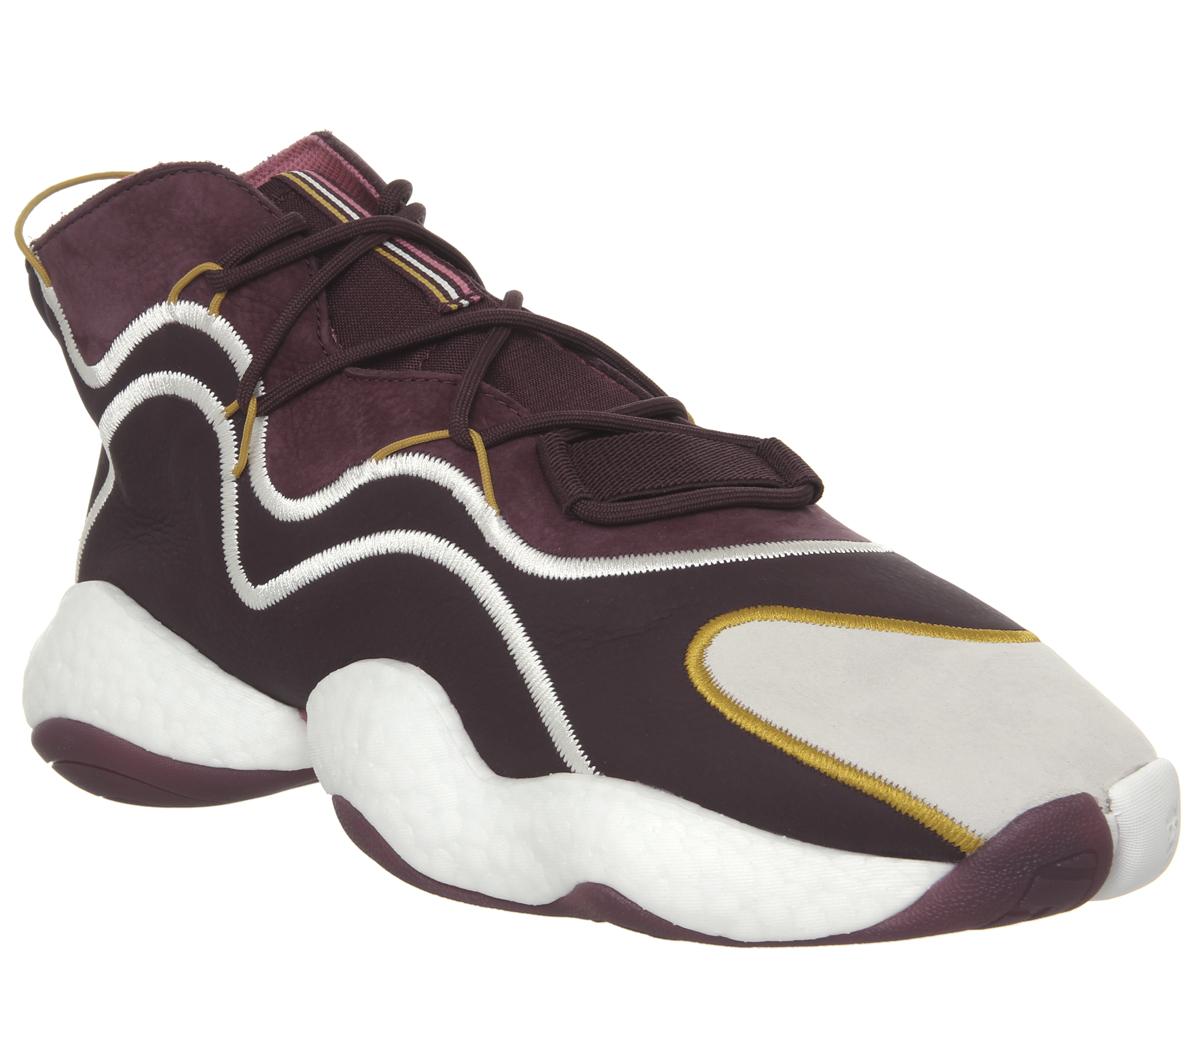 adidas Consortium Crazy Byw Trainers 